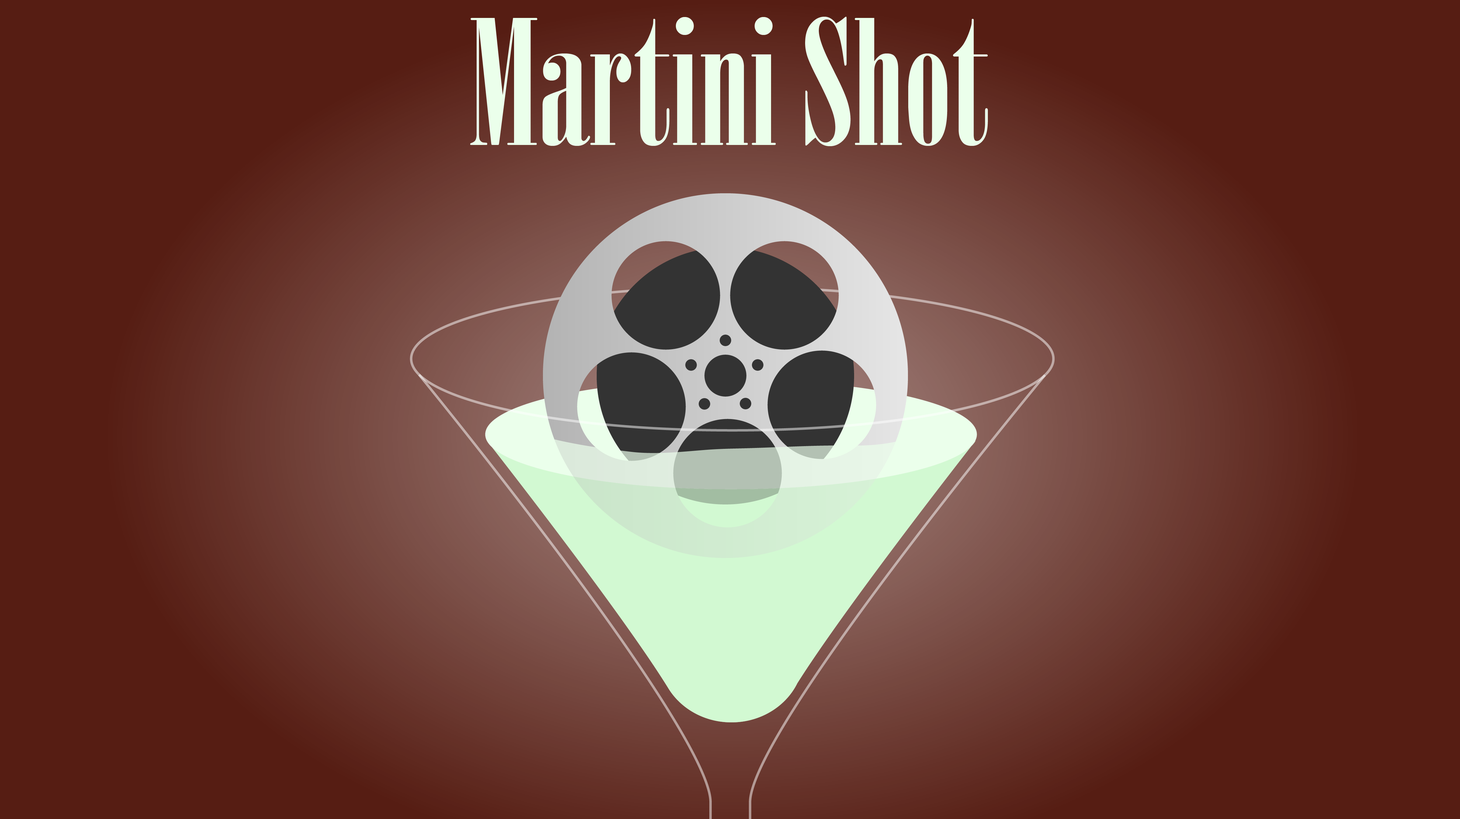 On today’s Martini Shot, I start with Game of Thrones. Spoiler Alert: I like it. But by episode 7, I was ready to start with the zombie show.